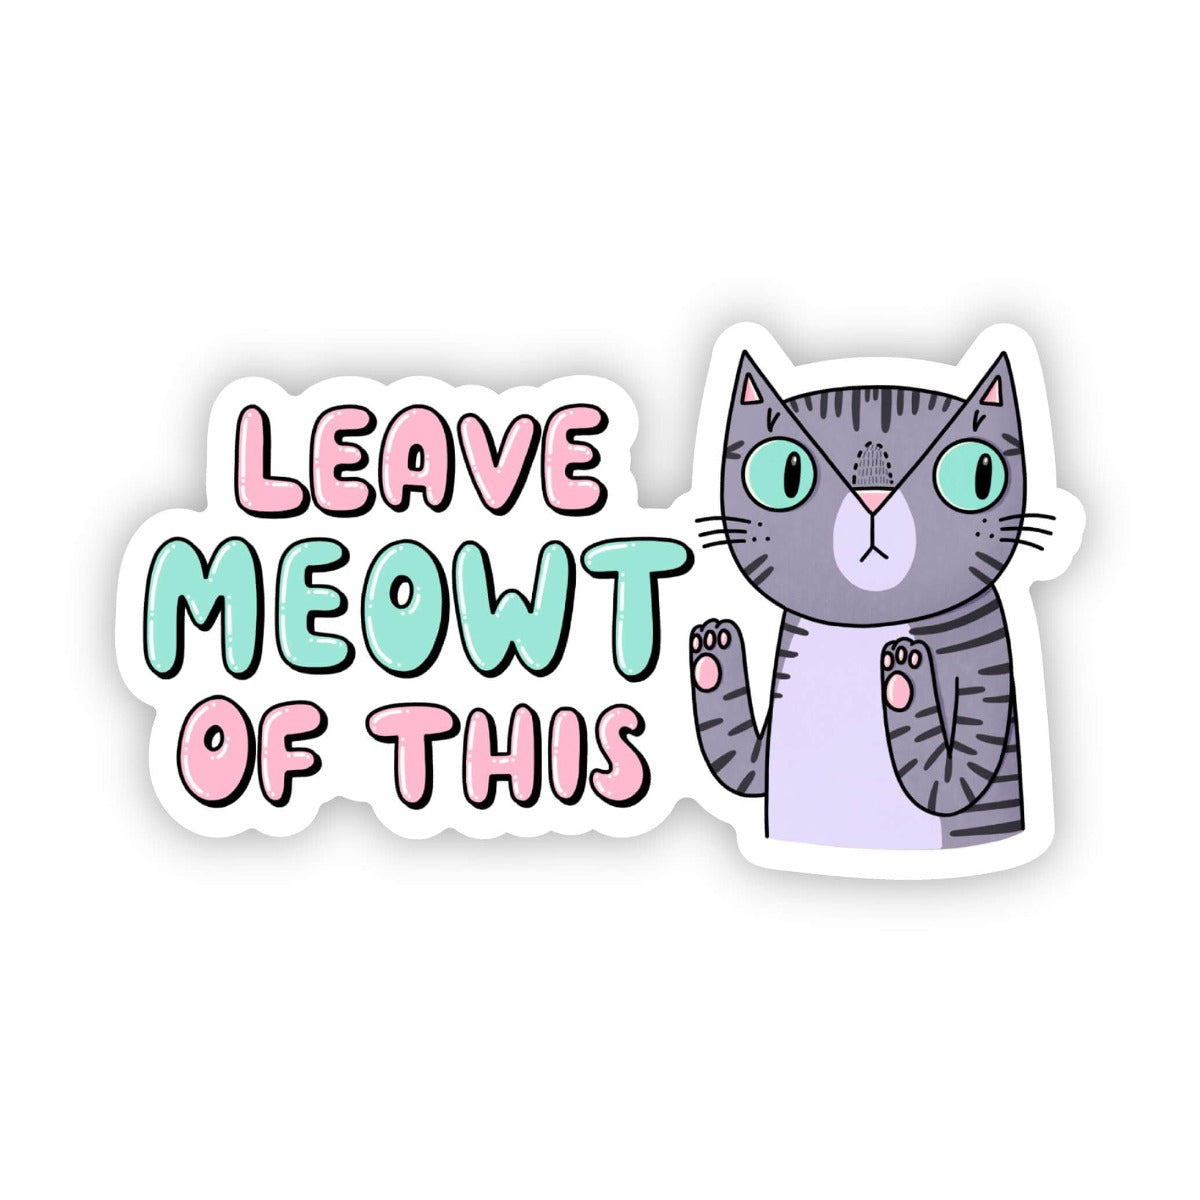 "Leave me-owt of this" cat sticker, image 1